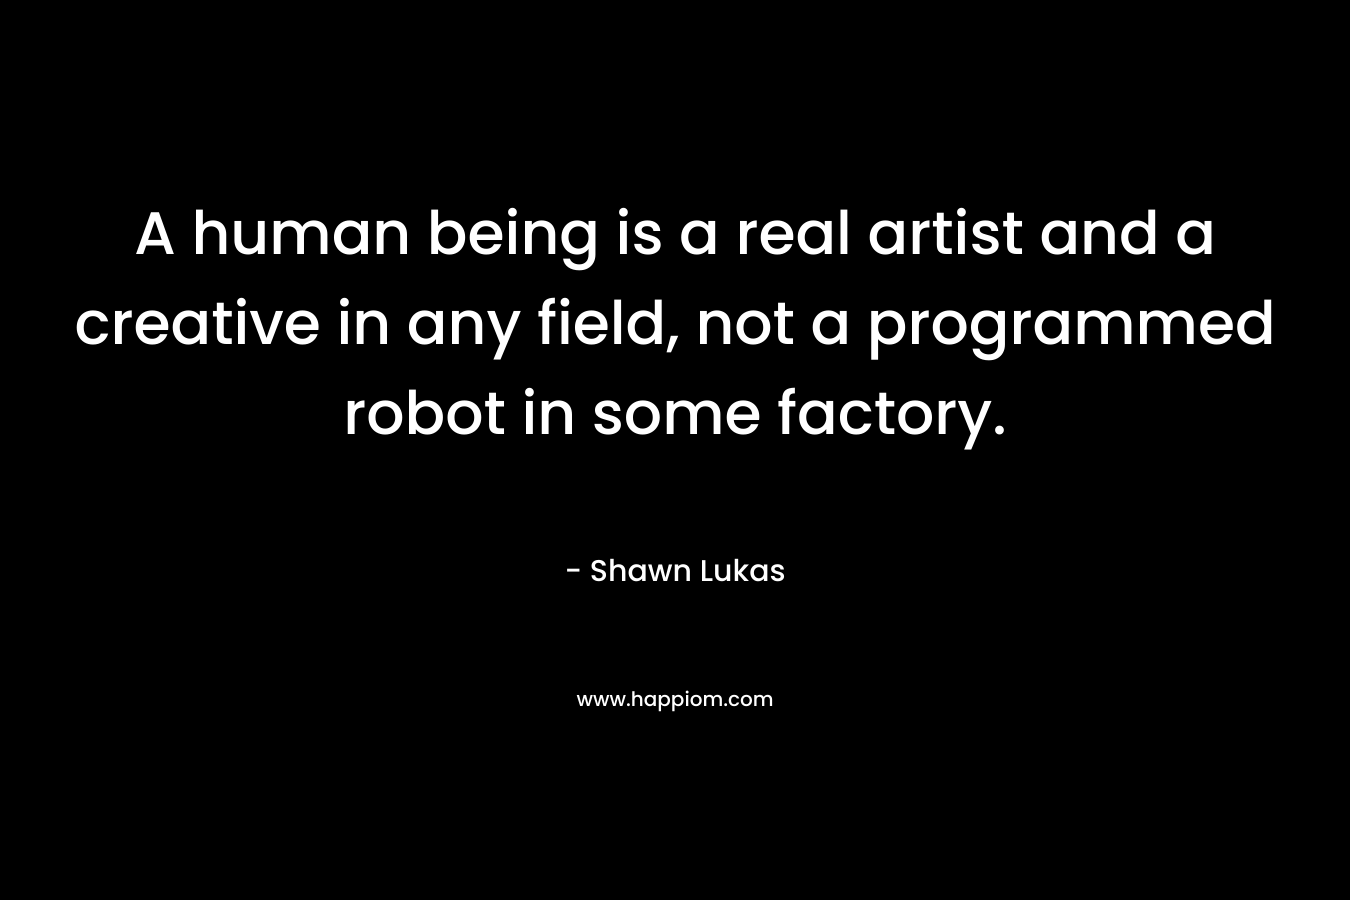 A human being is a real artist and a creative in any field, not a programmed robot in some factory. – Shawn Lukas